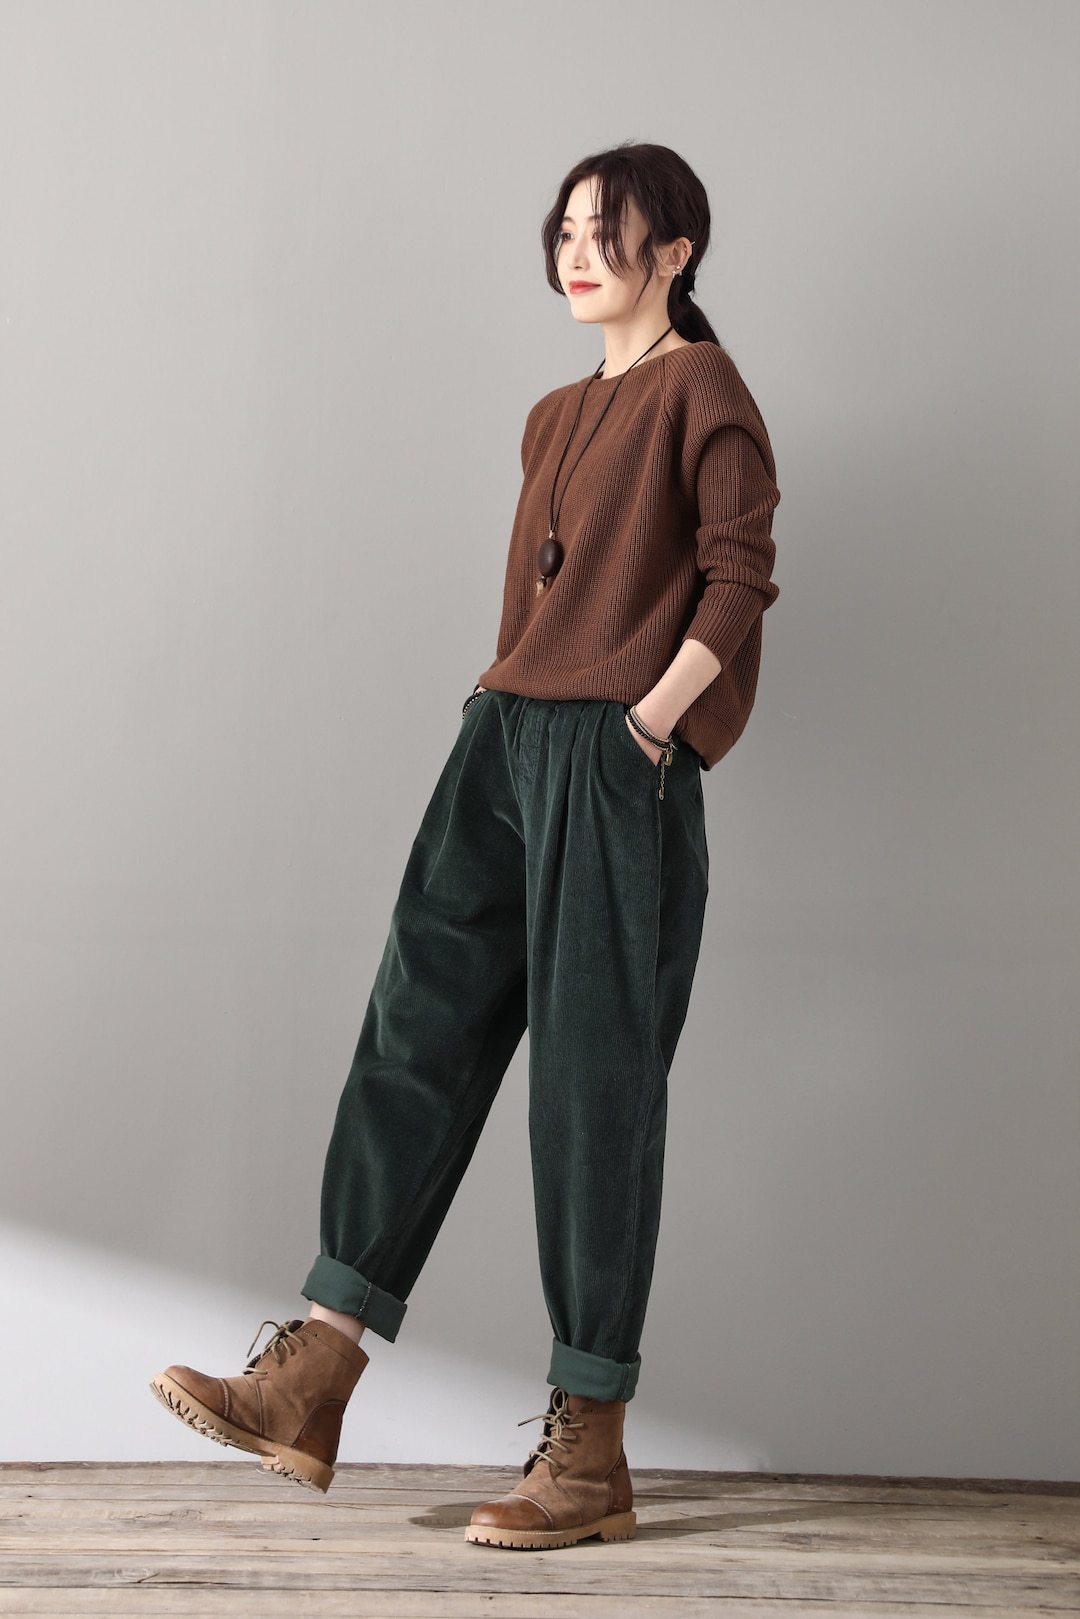 Winter Warm High Waist Casual Loose Trouser Pants For Women Thicken Jogger  Pockets Sweatpants Cargo Pants Ladies Warm Baggy Harem Trousers 